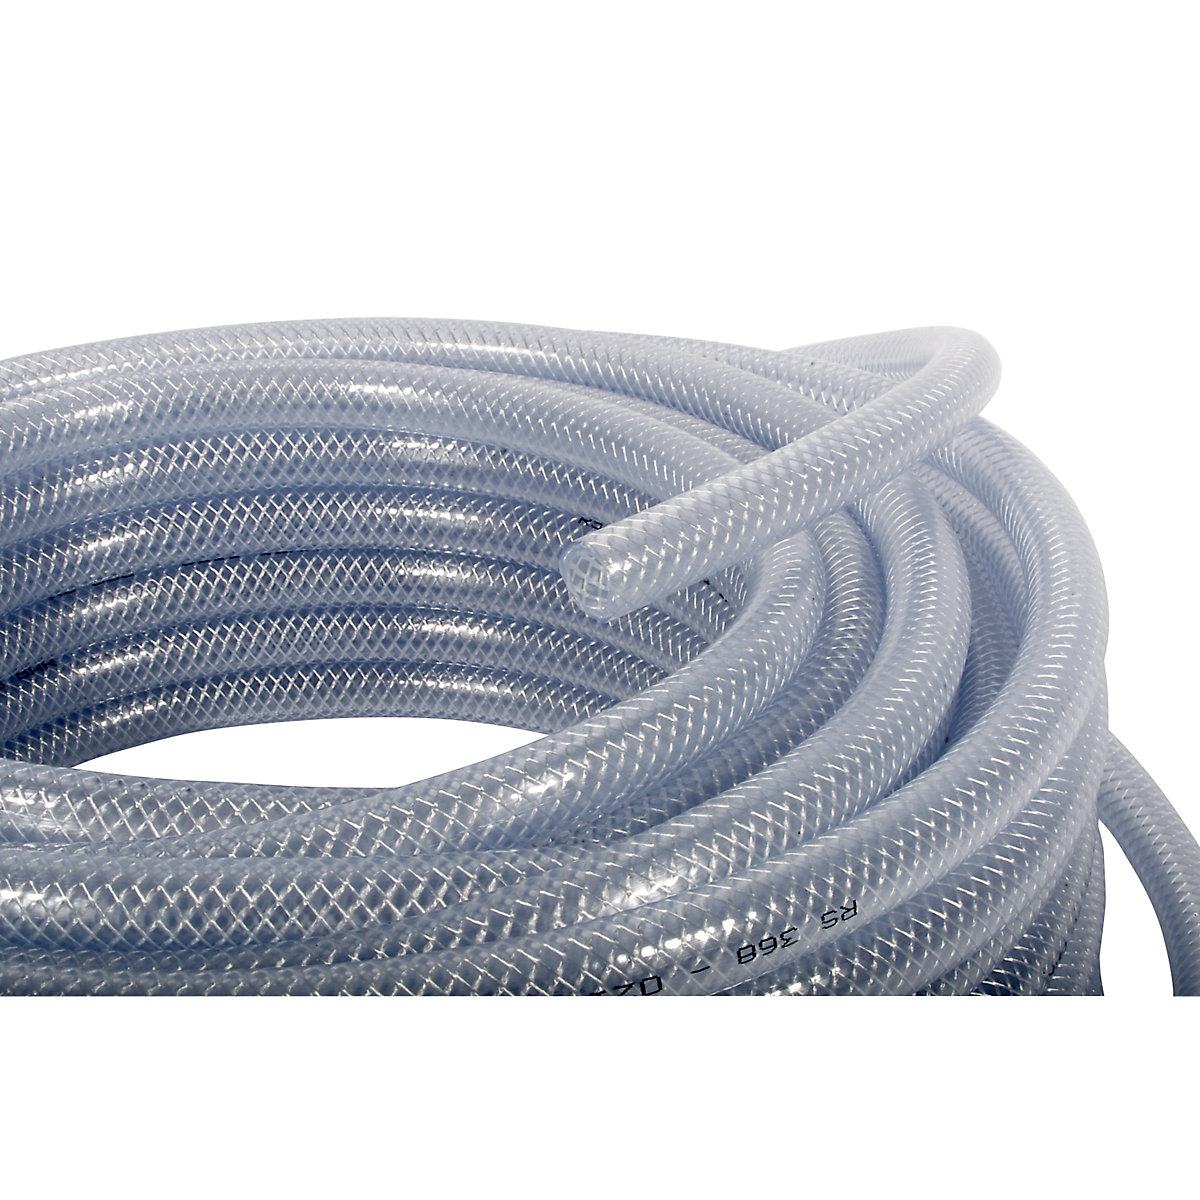 Water hose made of PVC, clear - COBA